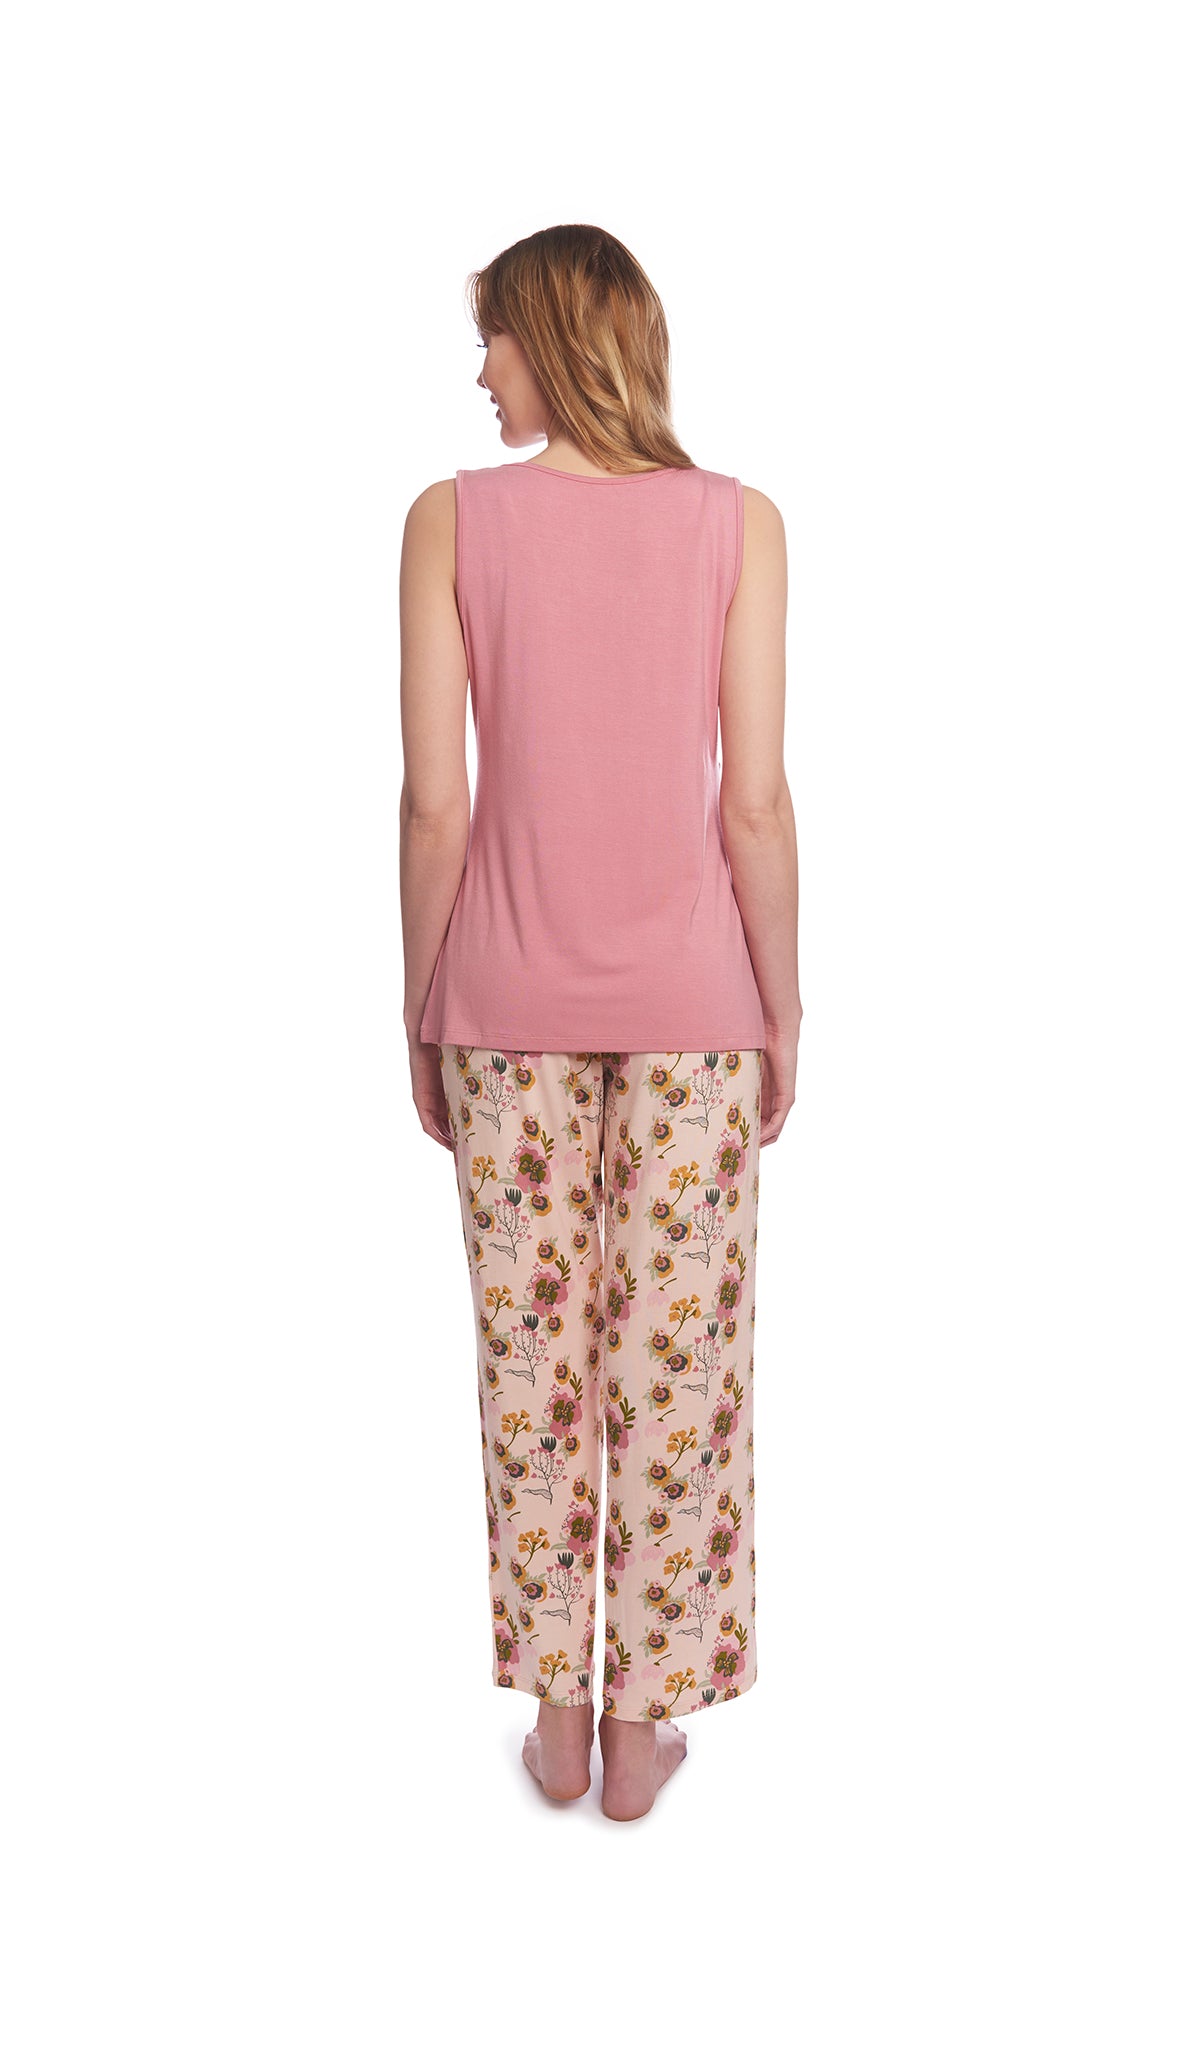 Camellia Analise 5-Piece Set, back shot of woman wearing tank top and pant.